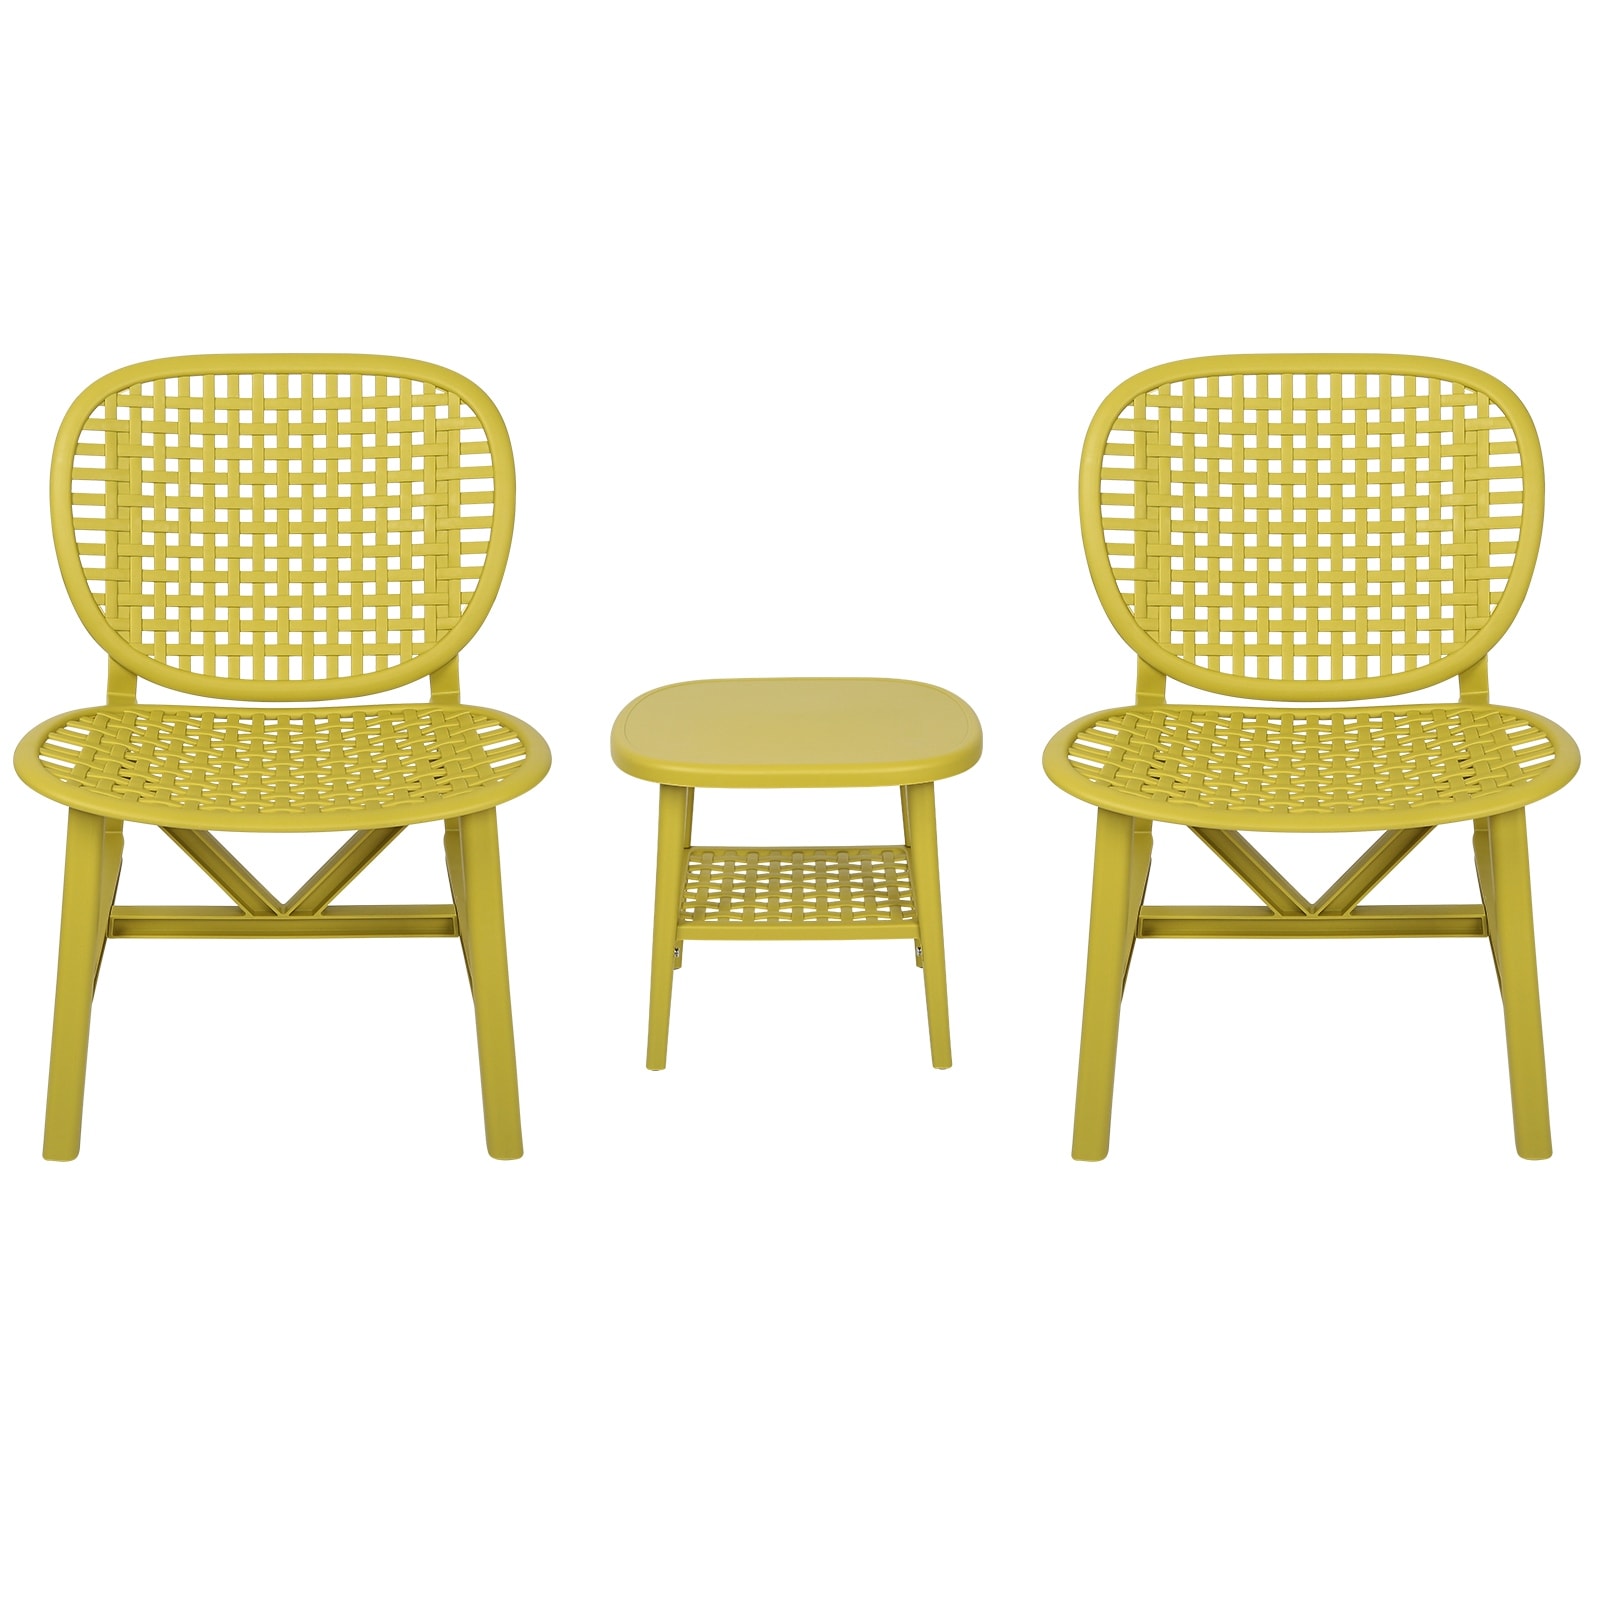 3 Pieces Patio Table Chair Set With 1 Table And 2 Chairs